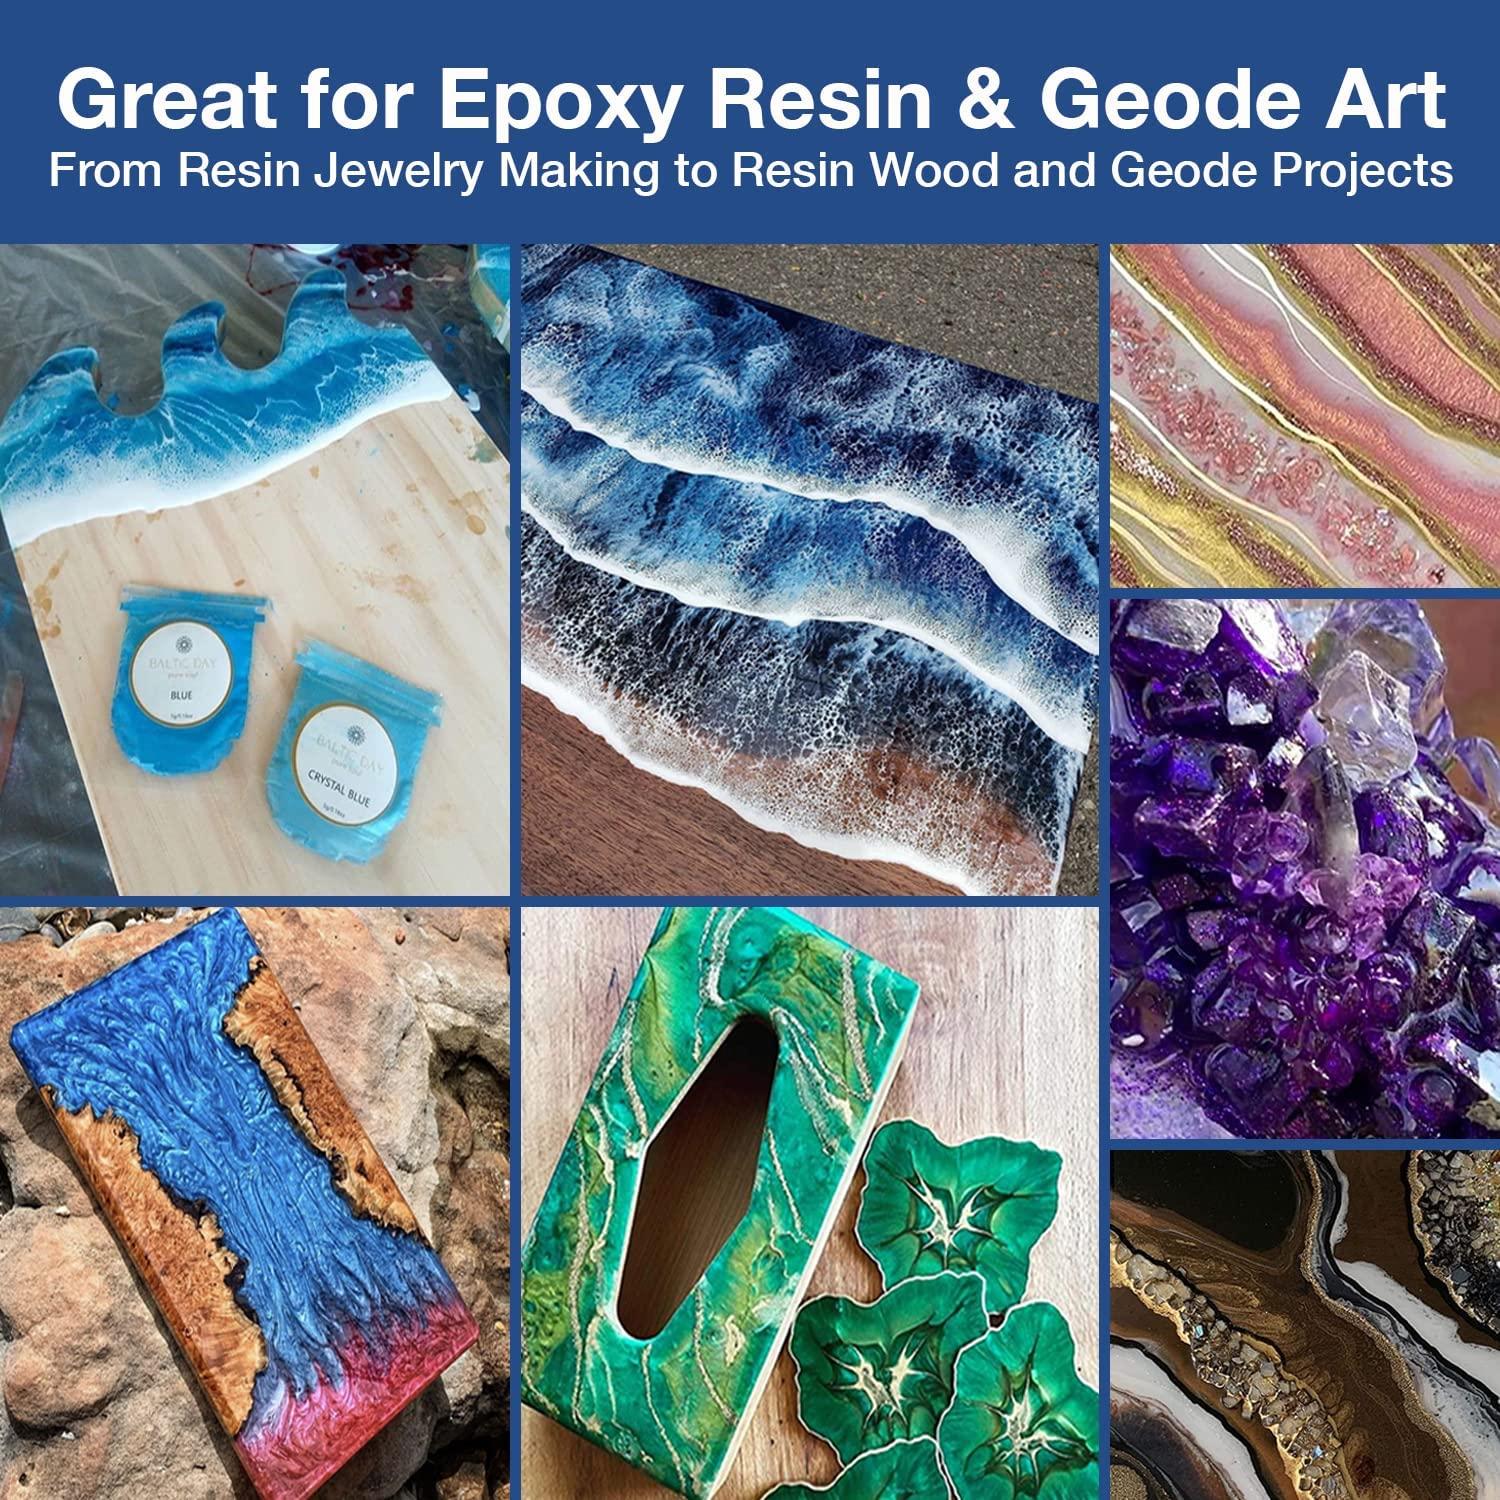 How to Polish Epoxy Resin for a Clear Finish — BALTIC DAY